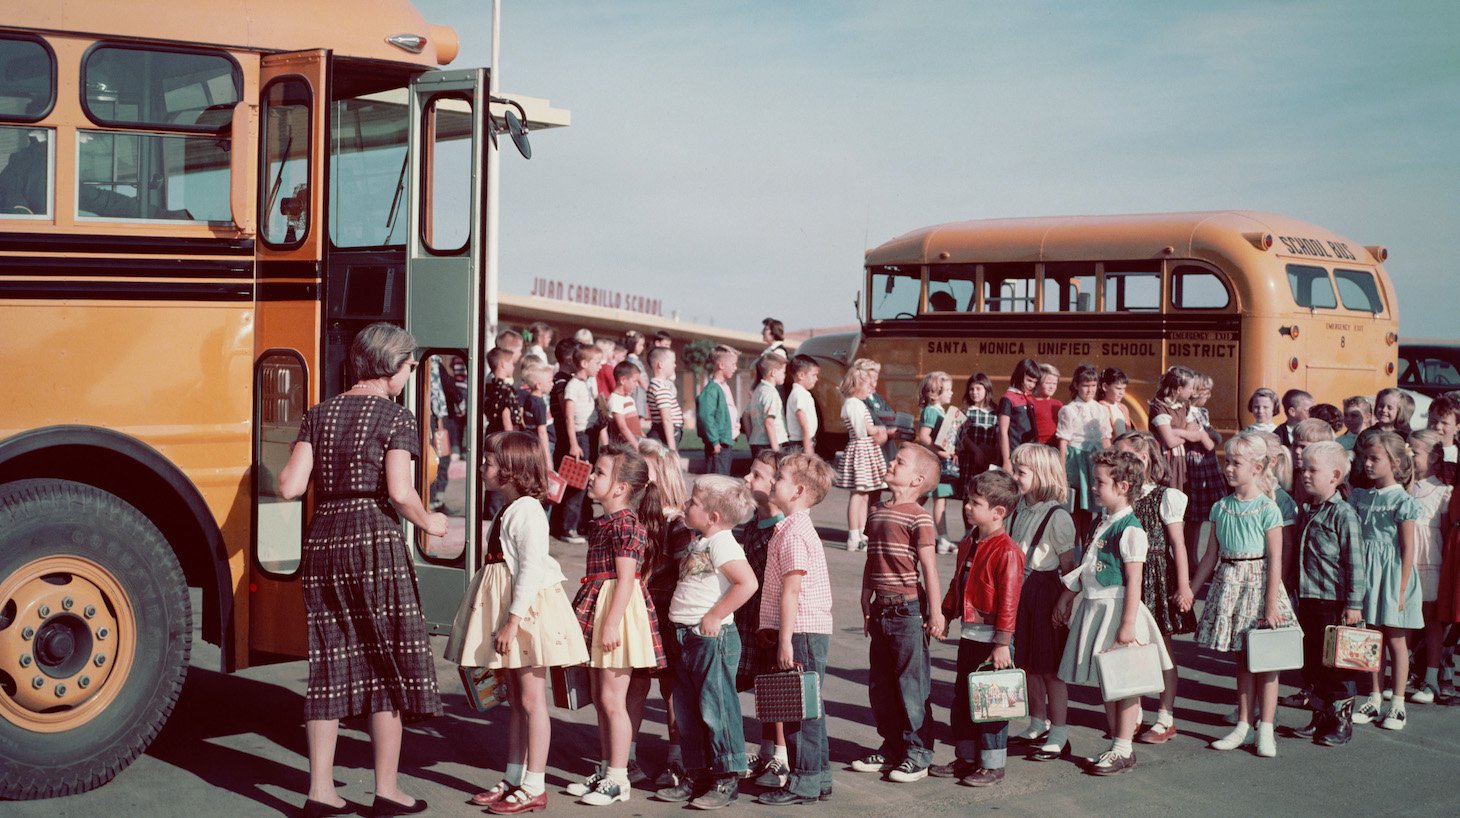 Schoolchilden queueing in pairs to get on the school bus, circa 1960. (Photo by L. Willinger/FPG/Hulton Archive/Getty Images)